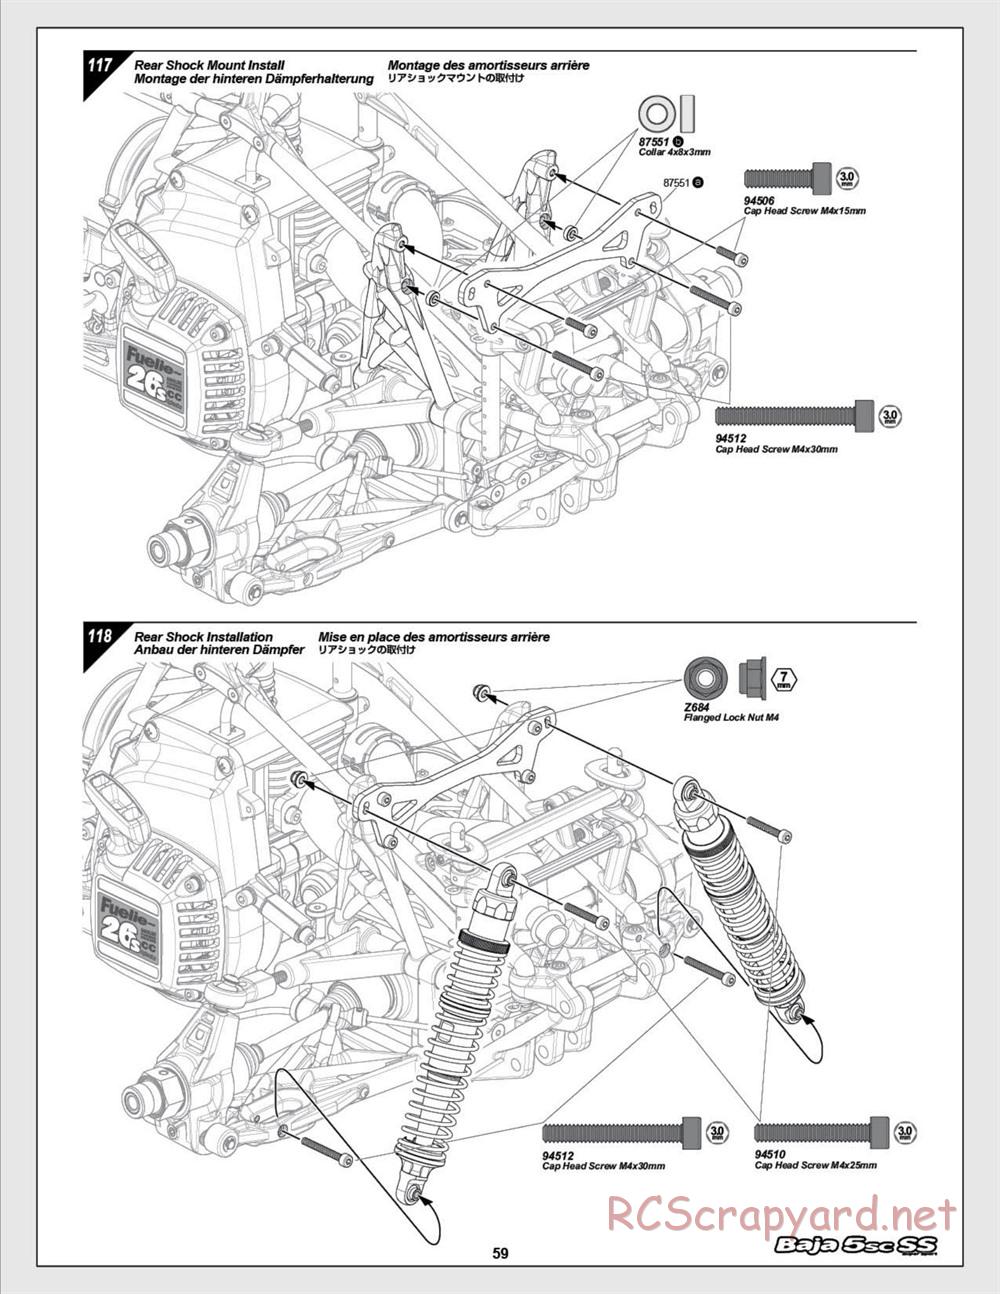 HPI - Baja 5SC SS - Exploded View - Page 59